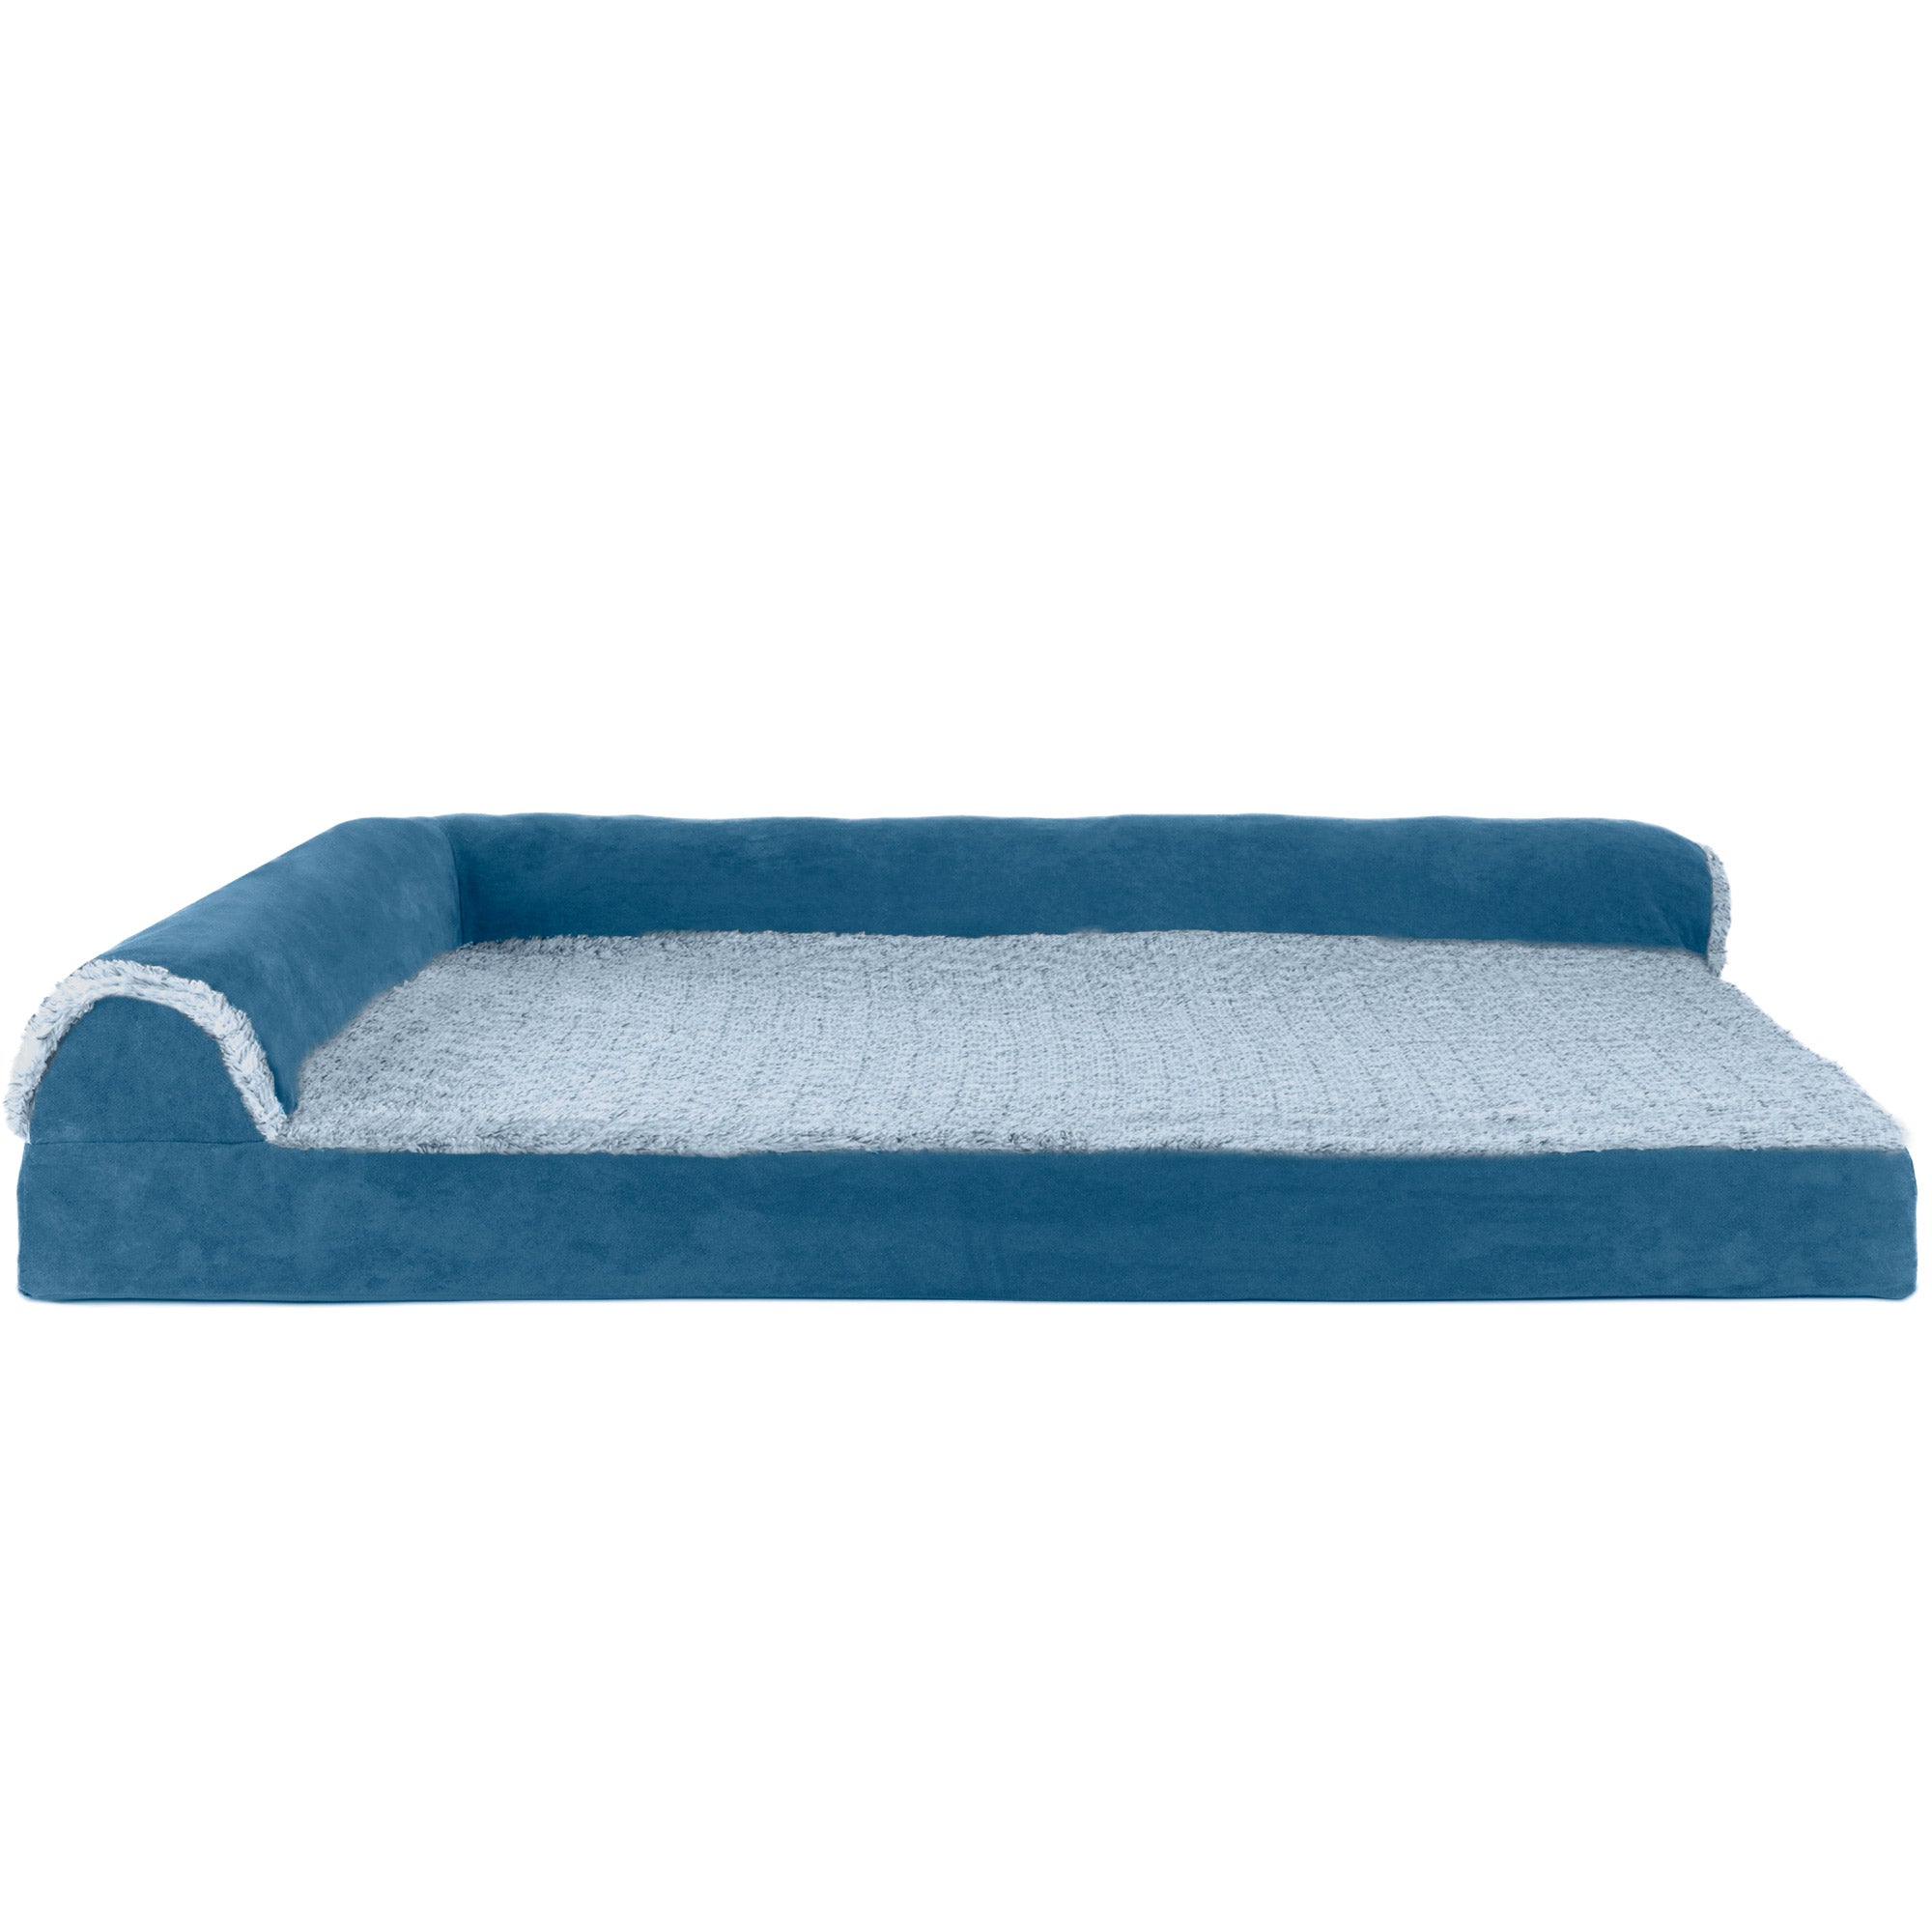 FurHaven Pet Products | Deluxe Memory Foam Chaise Faux Fur and Suede L-Shaped Lounge Pet Bed for Dogs and Cats， Marine Blue， Jumbo